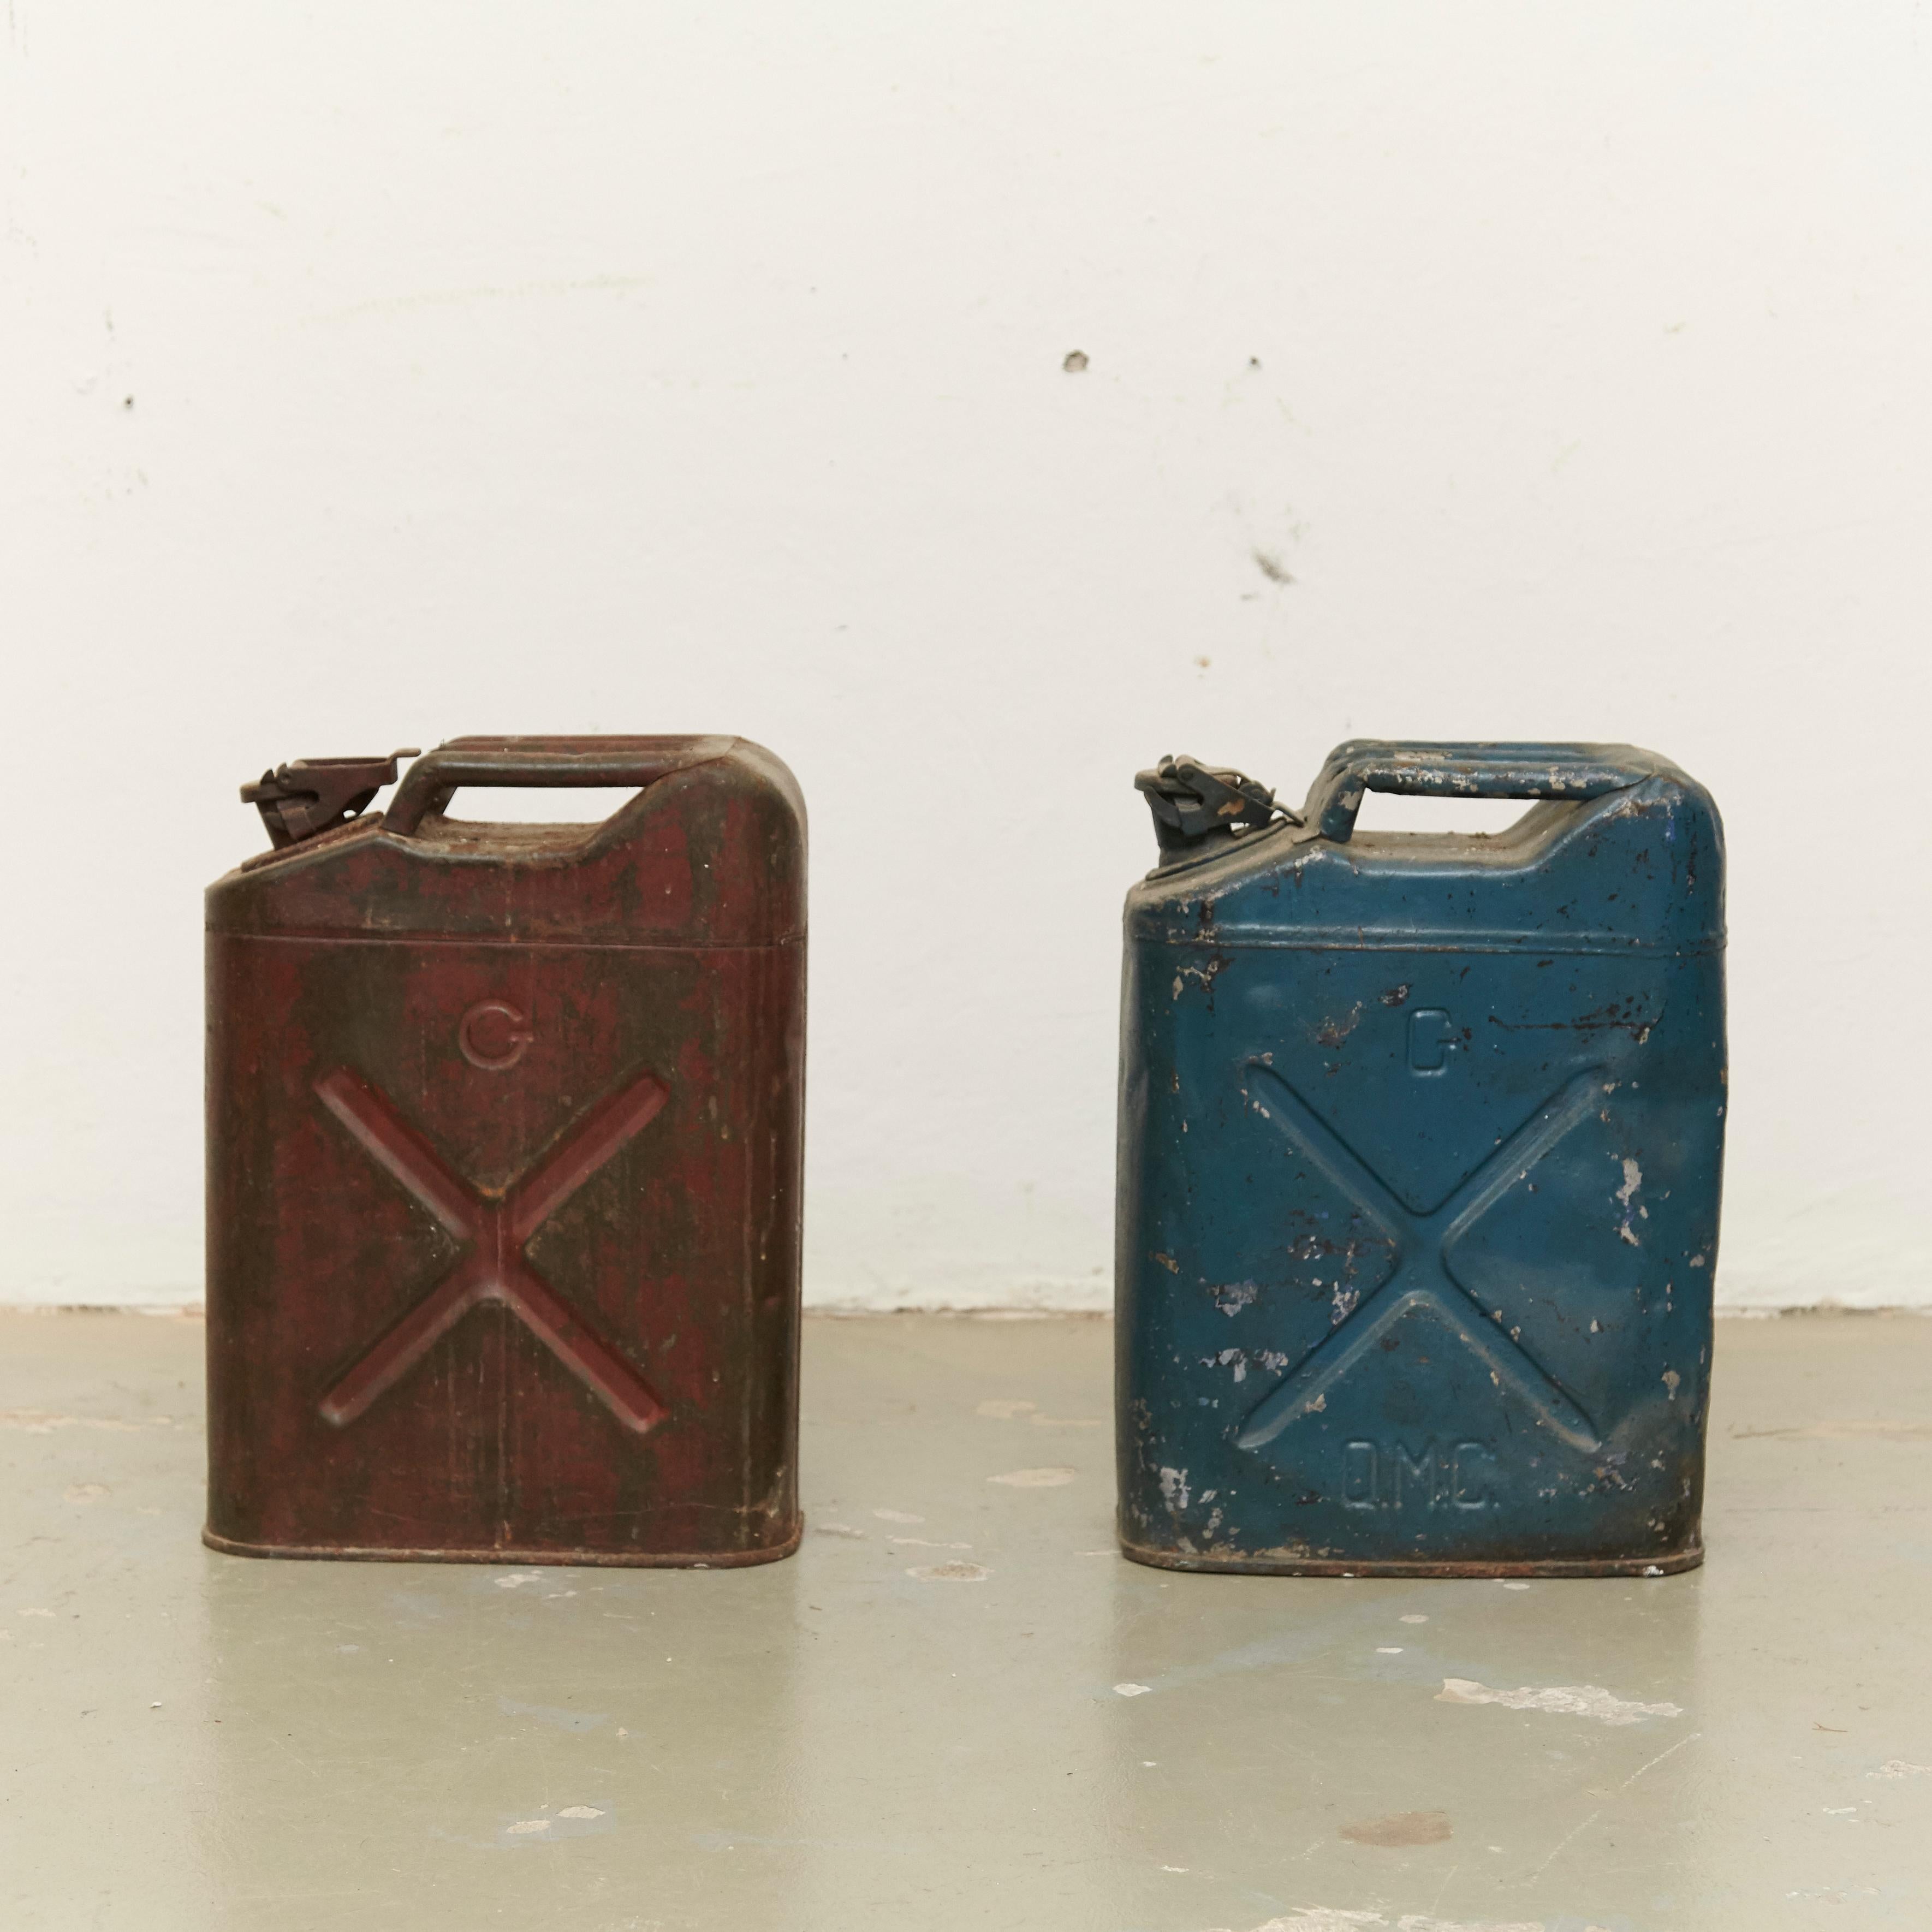 Pair of metal military red and blue gasoline tanks, circa 1950.